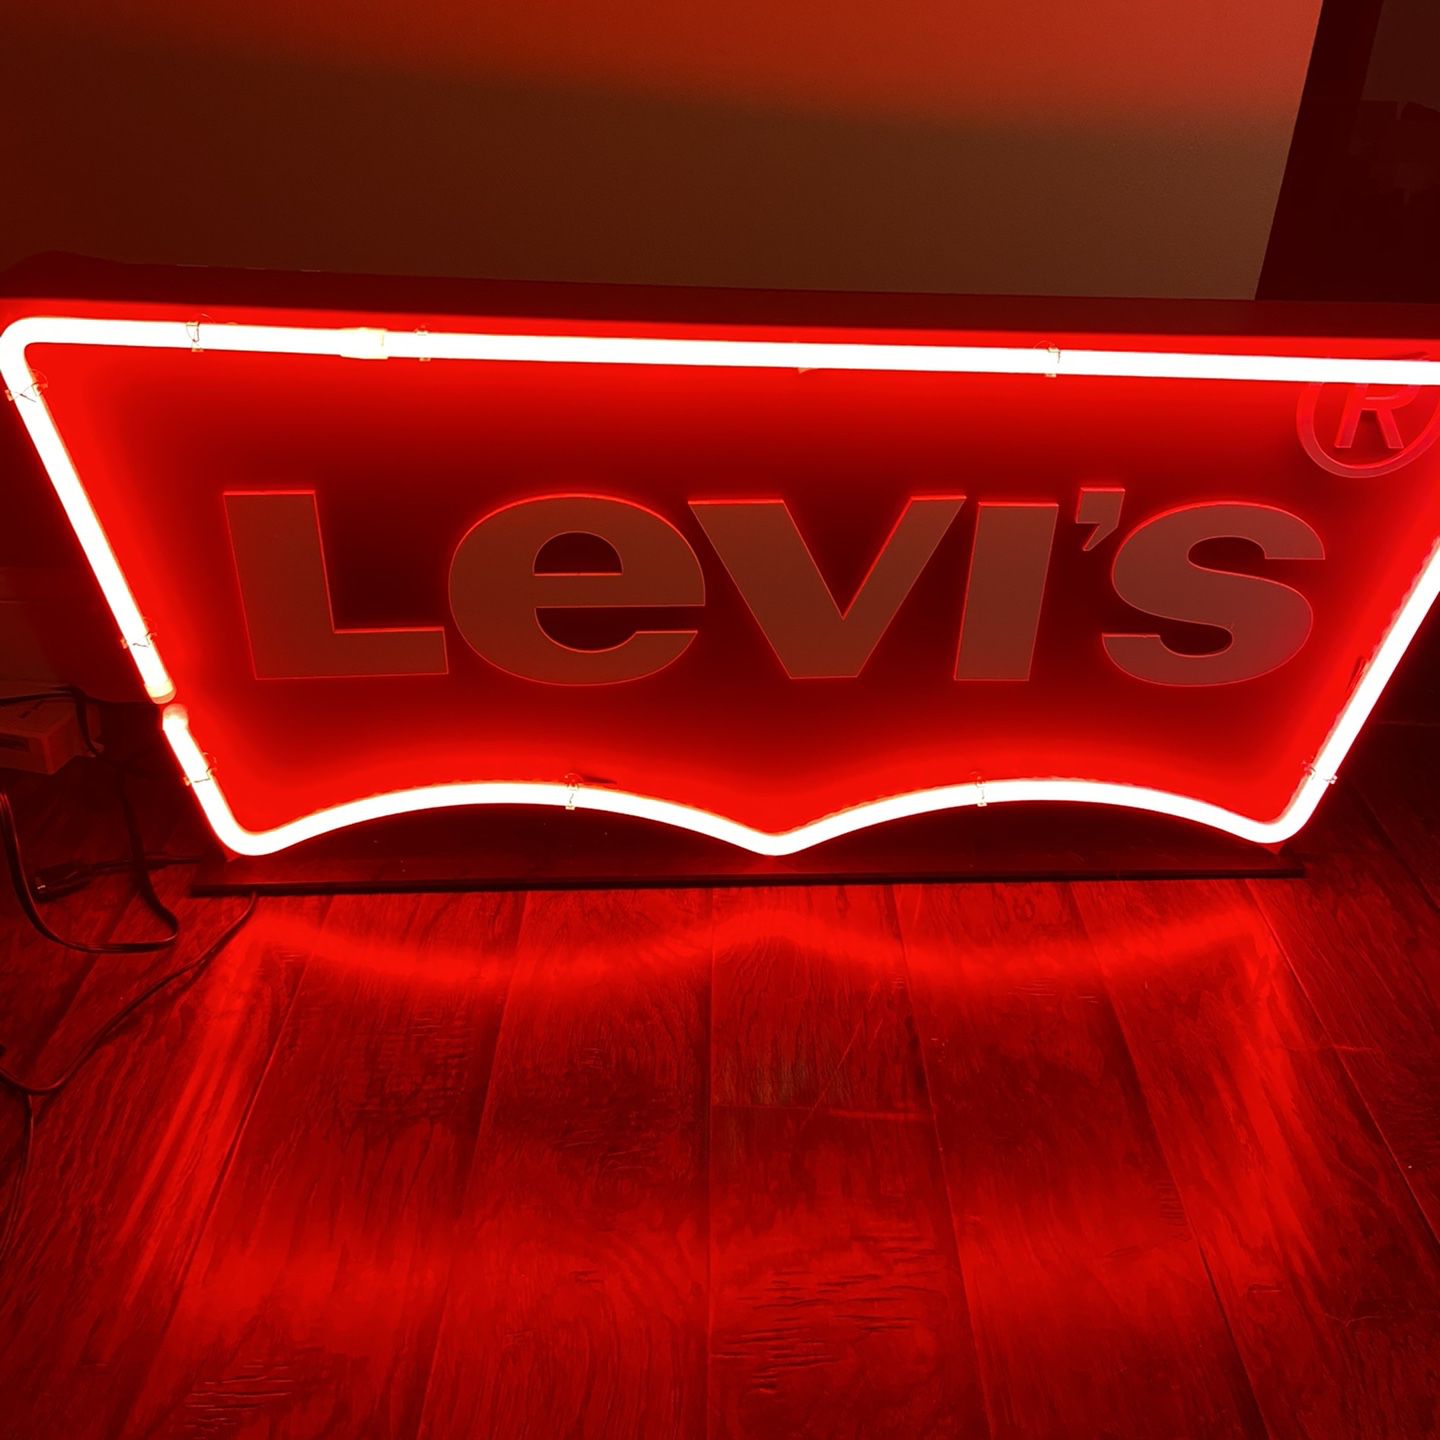 Large Levi's Neon Sign for Sale in Chesapeake, VA - OfferUp